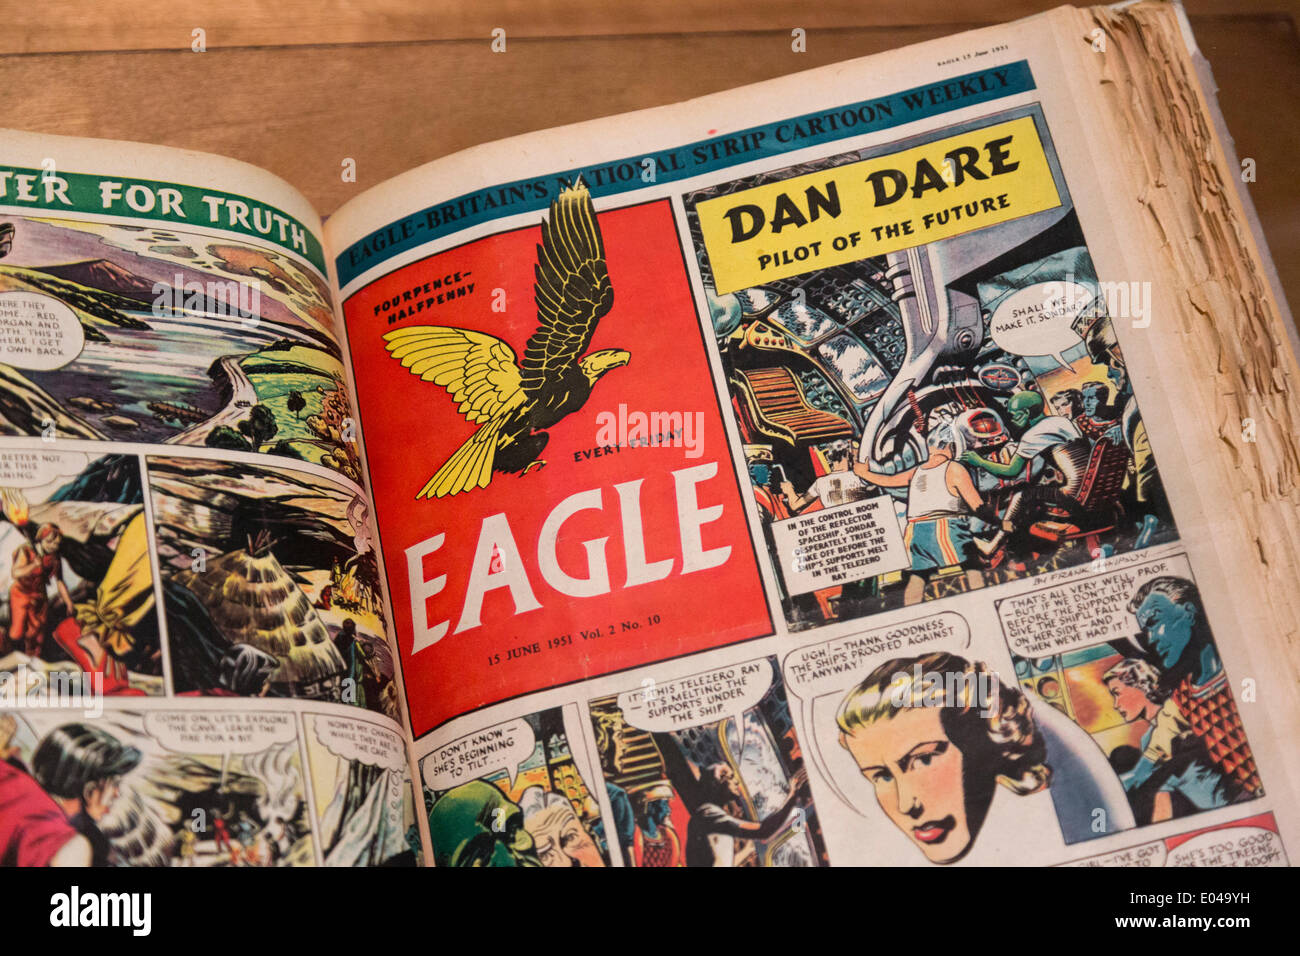 London, UK. 1 May 2014. Eagle compic with Dan Dare. The exhibition Comics Unmasked: Art and Anarchy in the UK, opens at the British Library, London. Credit:  Nick Savage/Alamy Live News Stock Photo